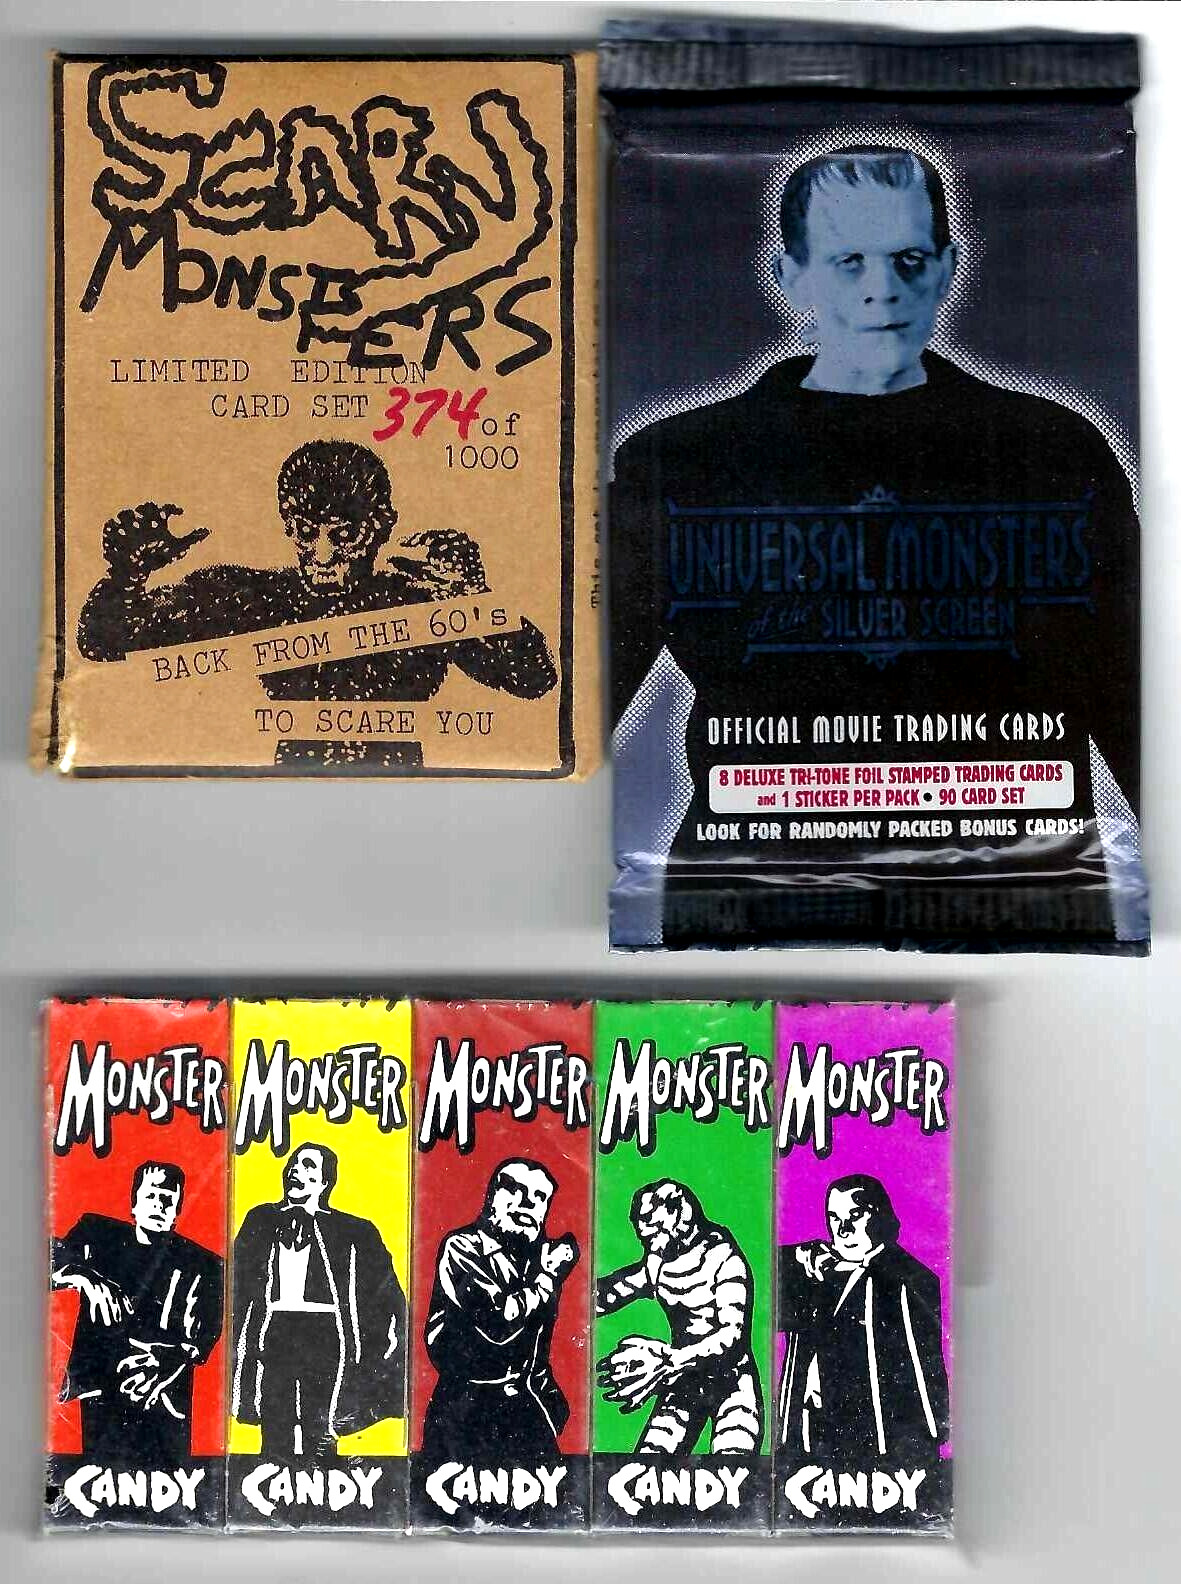 SCARY MONSTERS LIMITED EDITION PACK SET 9 CARDS 1 SEALED PK 5 SEALED CANDY BOXES